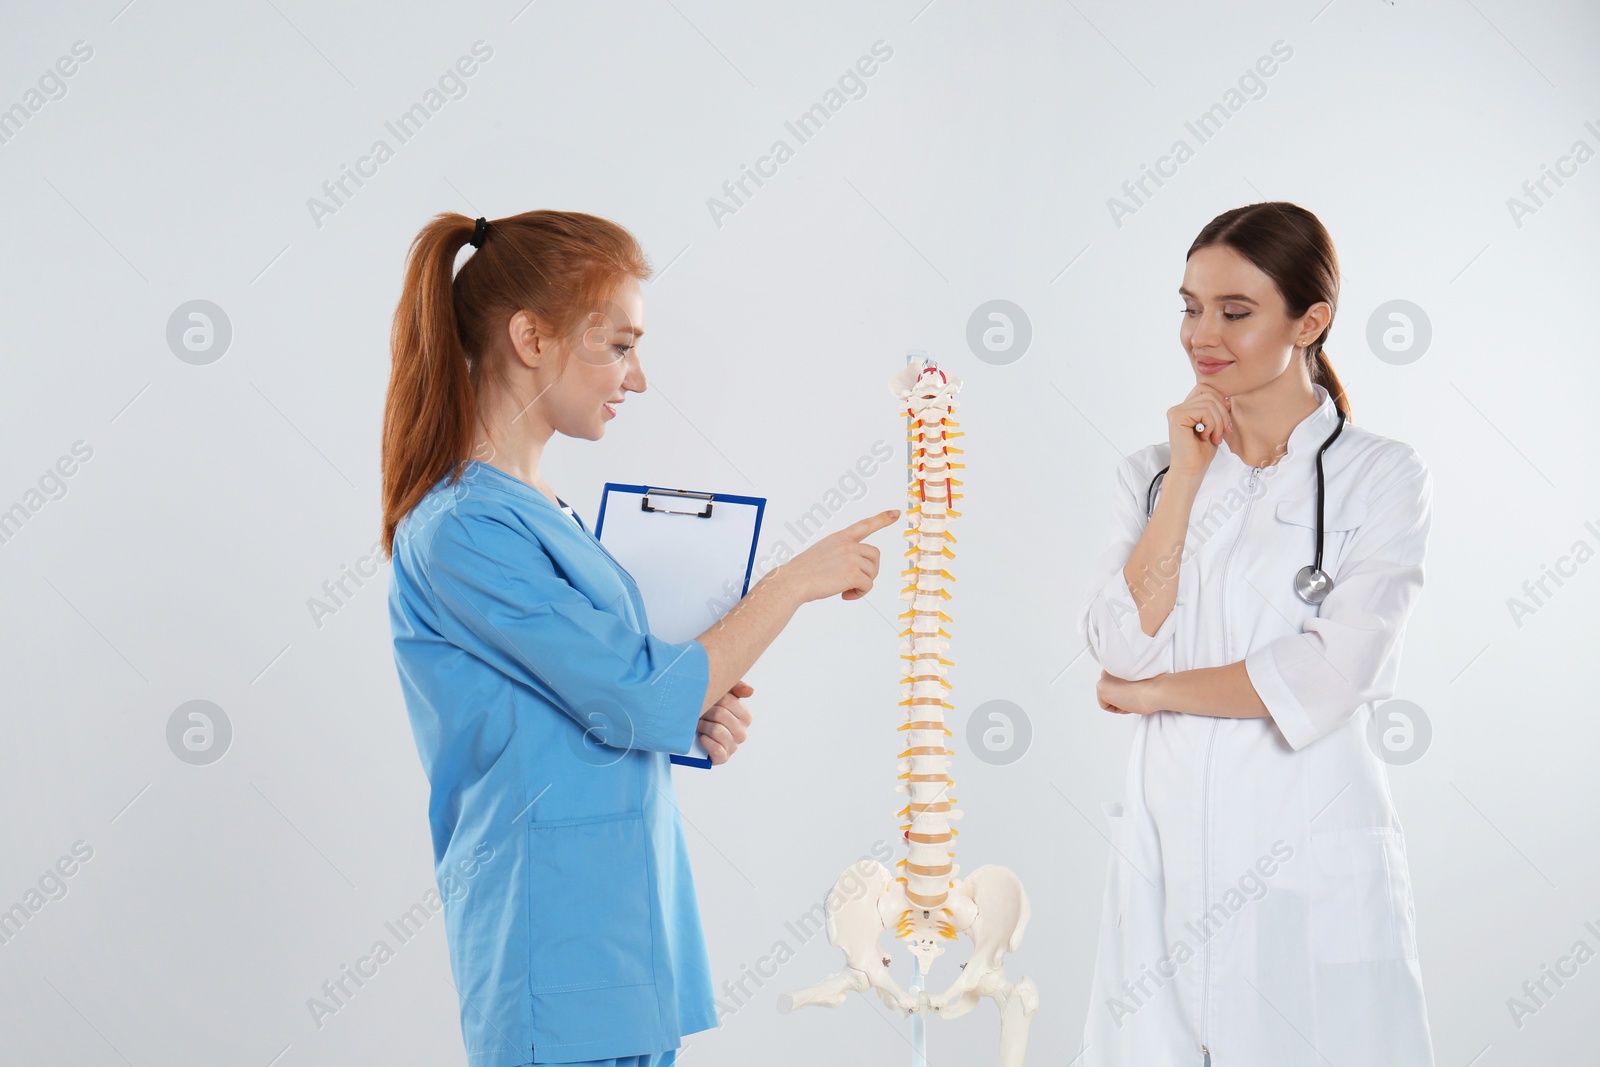 Photo of Professional orthopedist with human spine model teaching medical student against light background